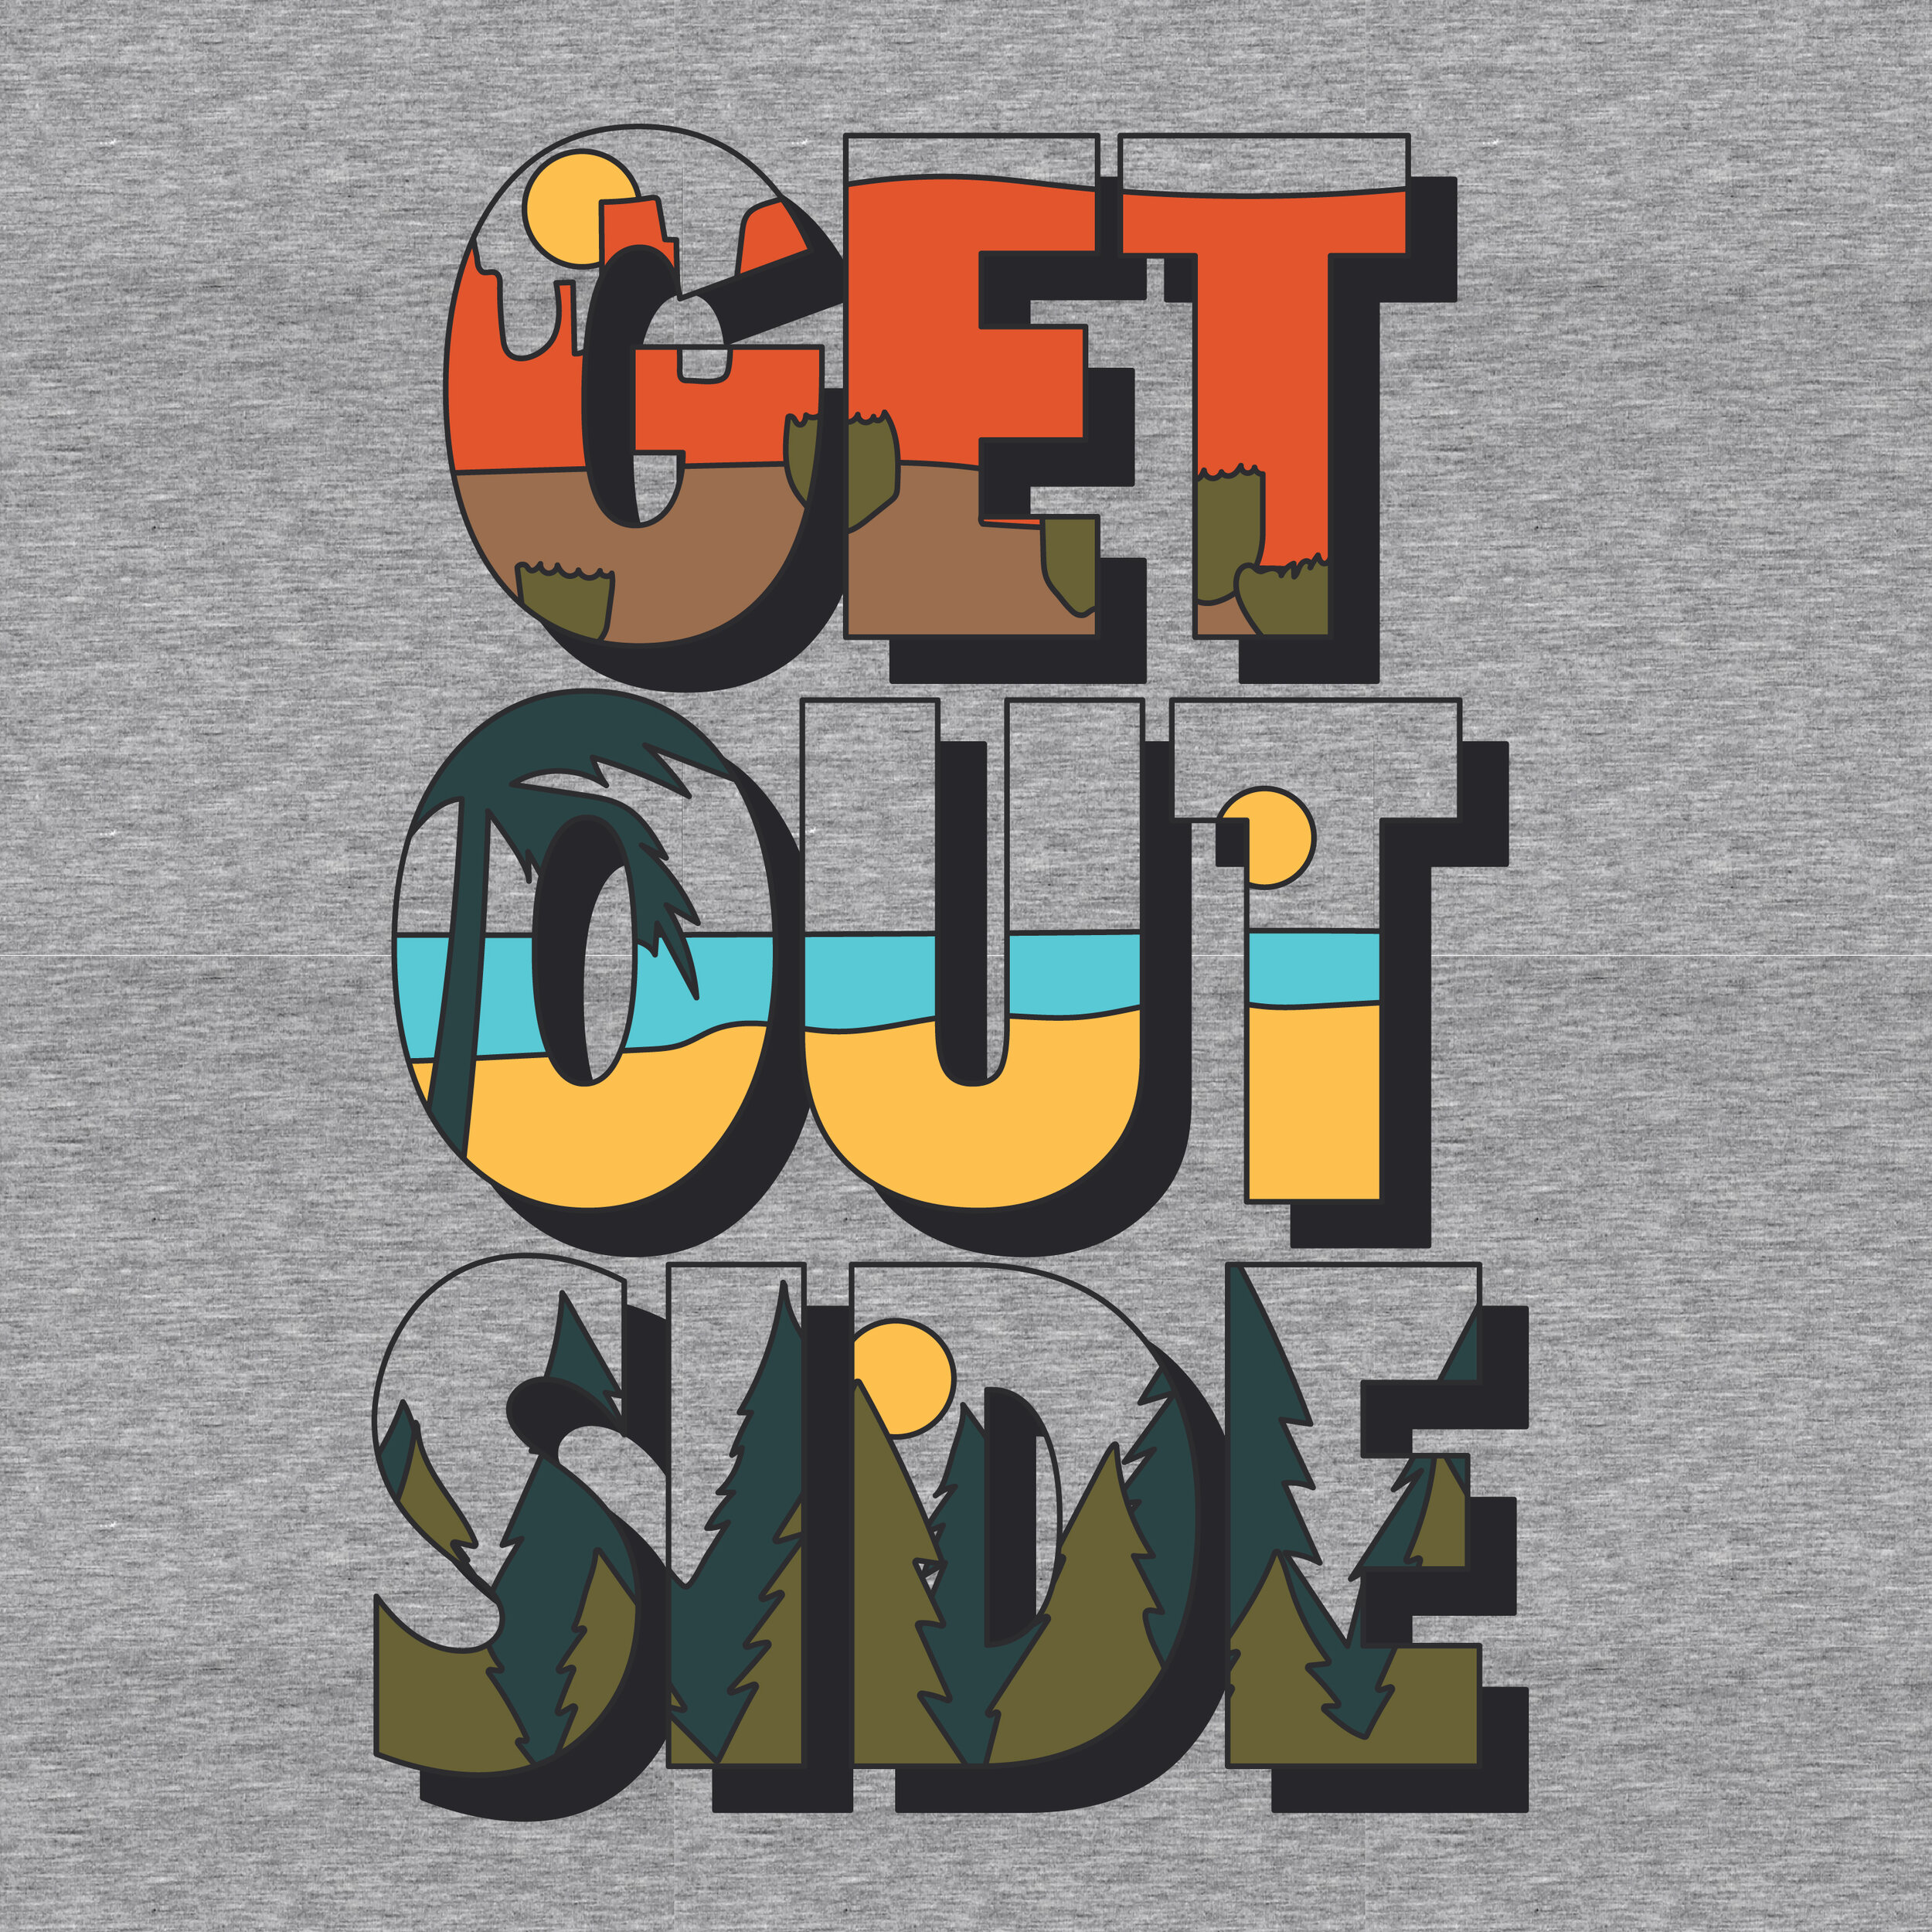 get out side-01.jpg